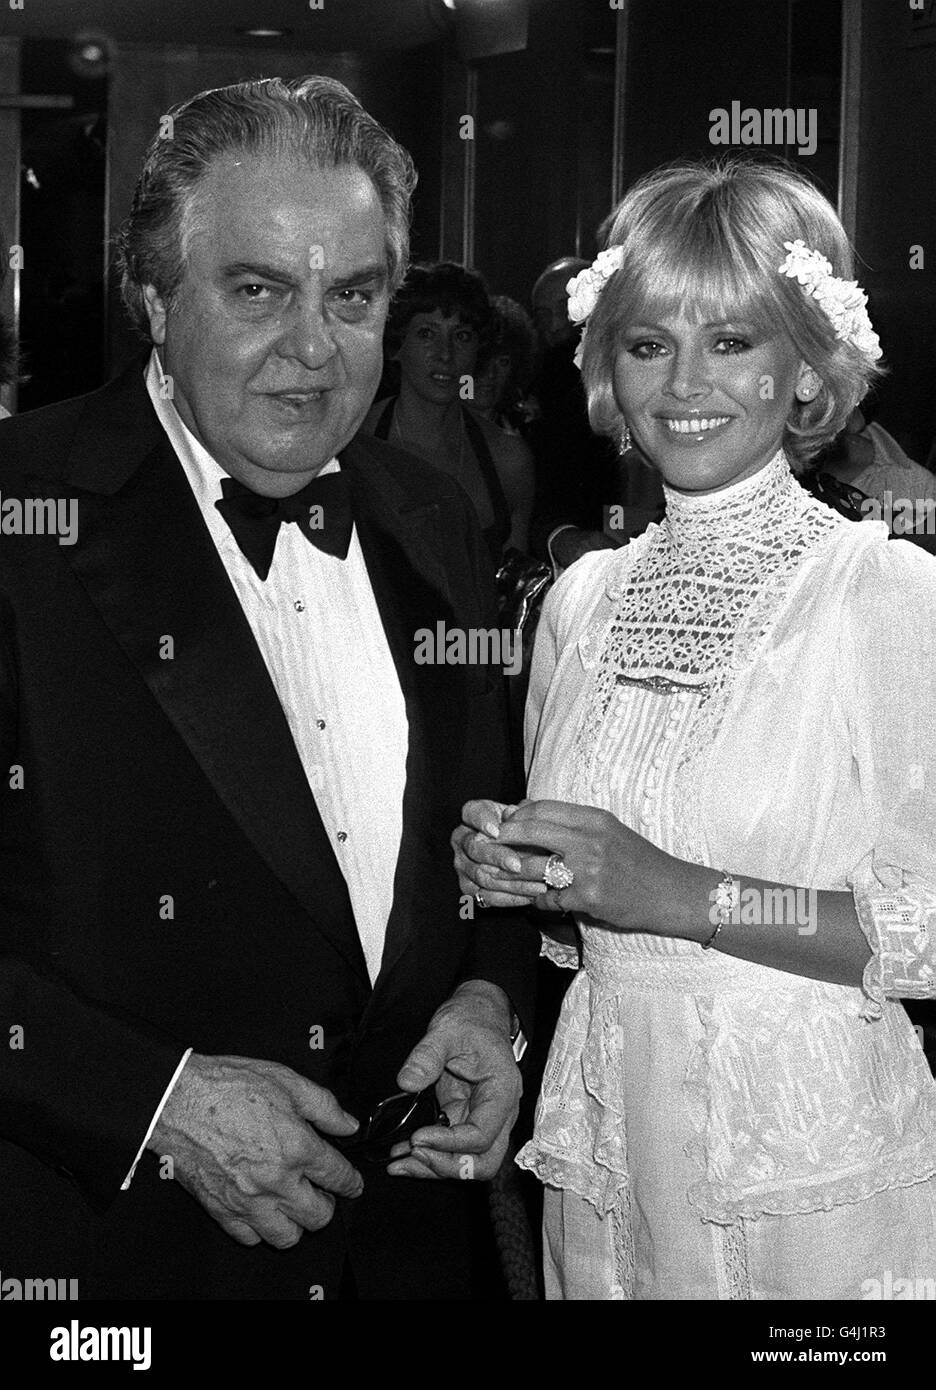 James Bond Producer Albert Broccoli with actress Britt Ekland, who co-stars with Roger Moore in the new James Bond film, at the premiere of 'Moonraker'. Stock Photo